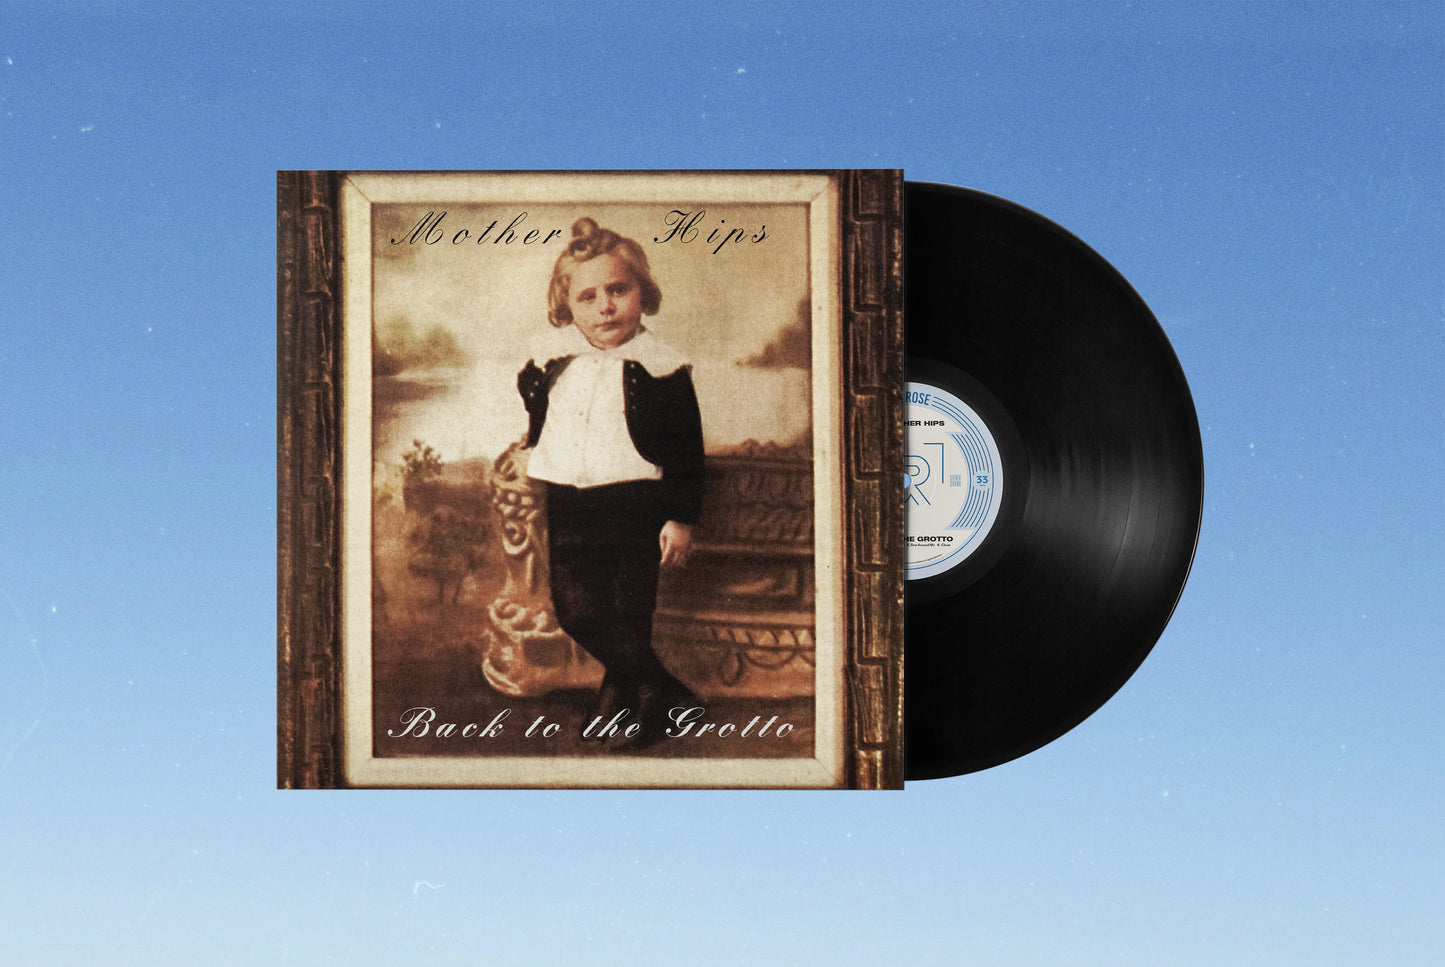 The Mother Hips - "Back To The Grotto" DOUBLE Vinyl (Limited Edition 30th Anniversary)